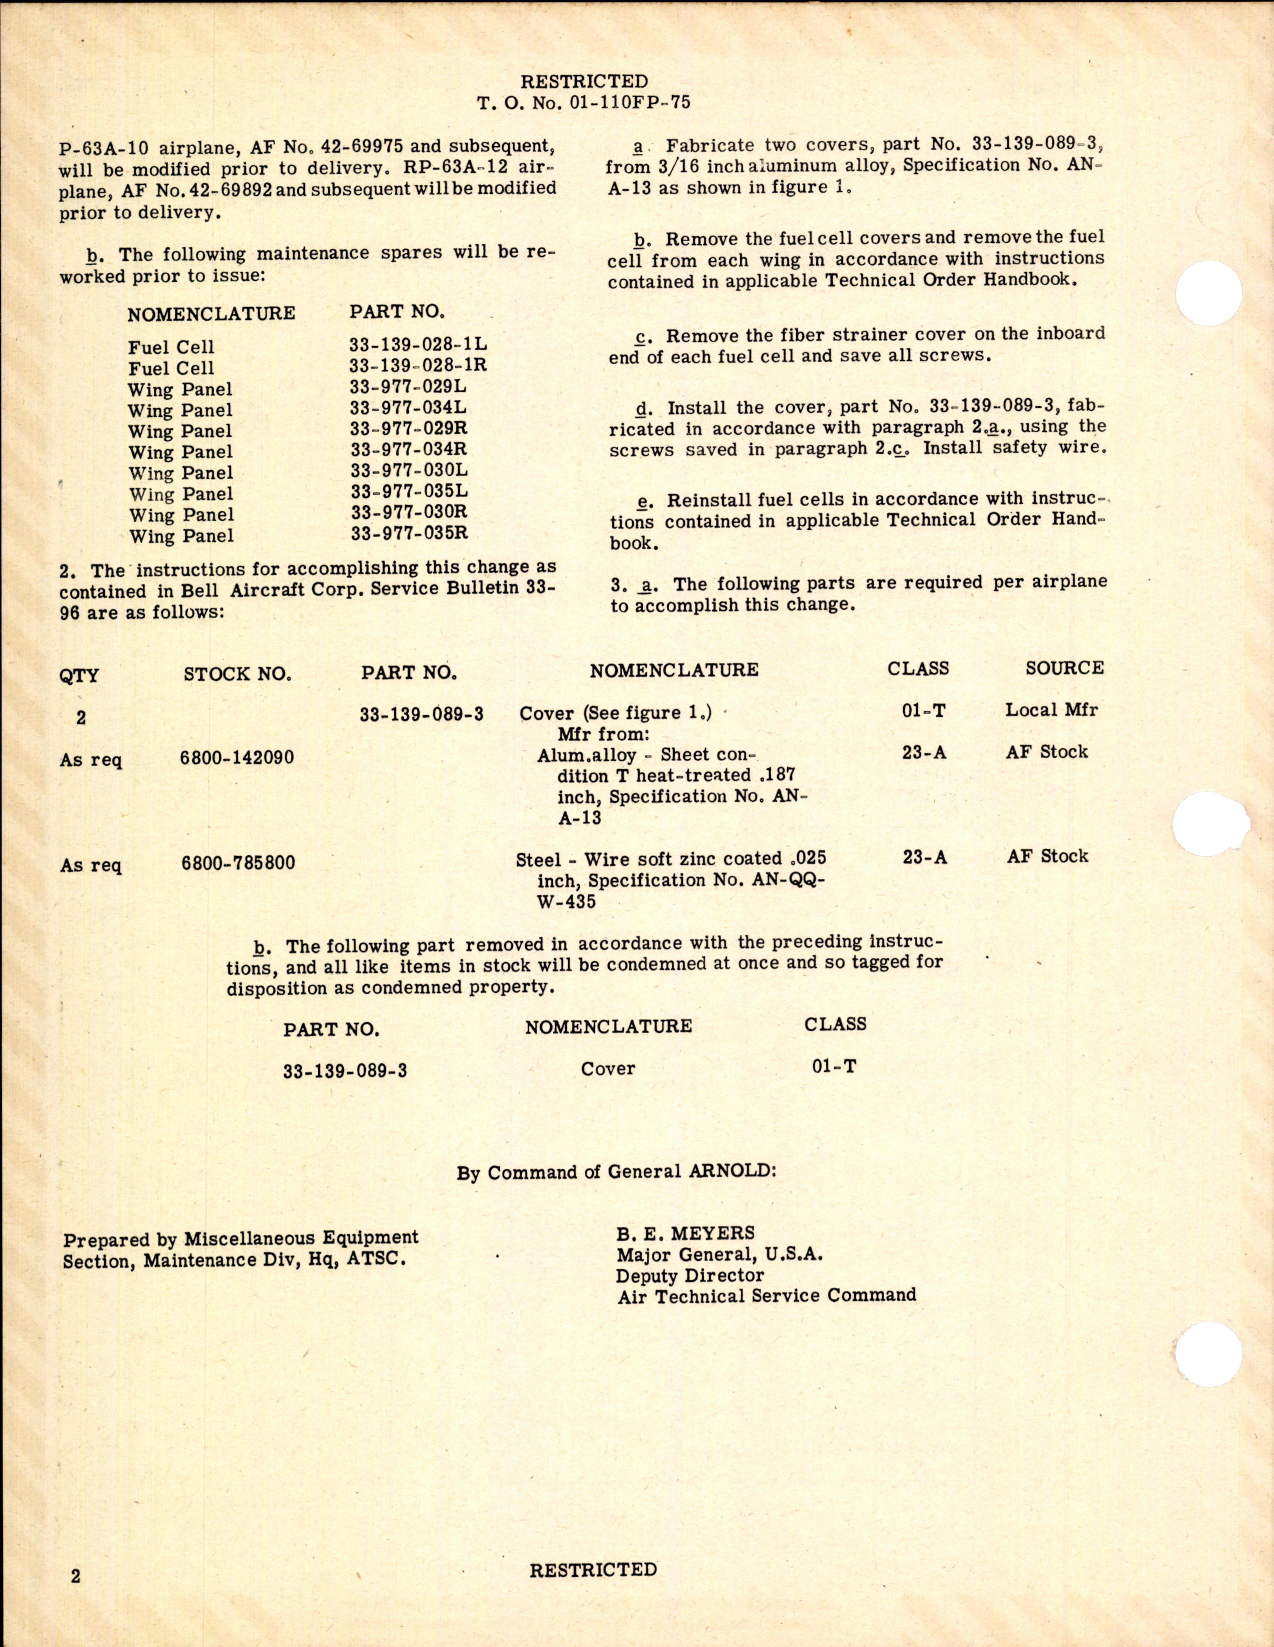 Sample page 2 from AirCorps Library document: Replacement of Strainer Cover on Self Sealing Fuel Cells